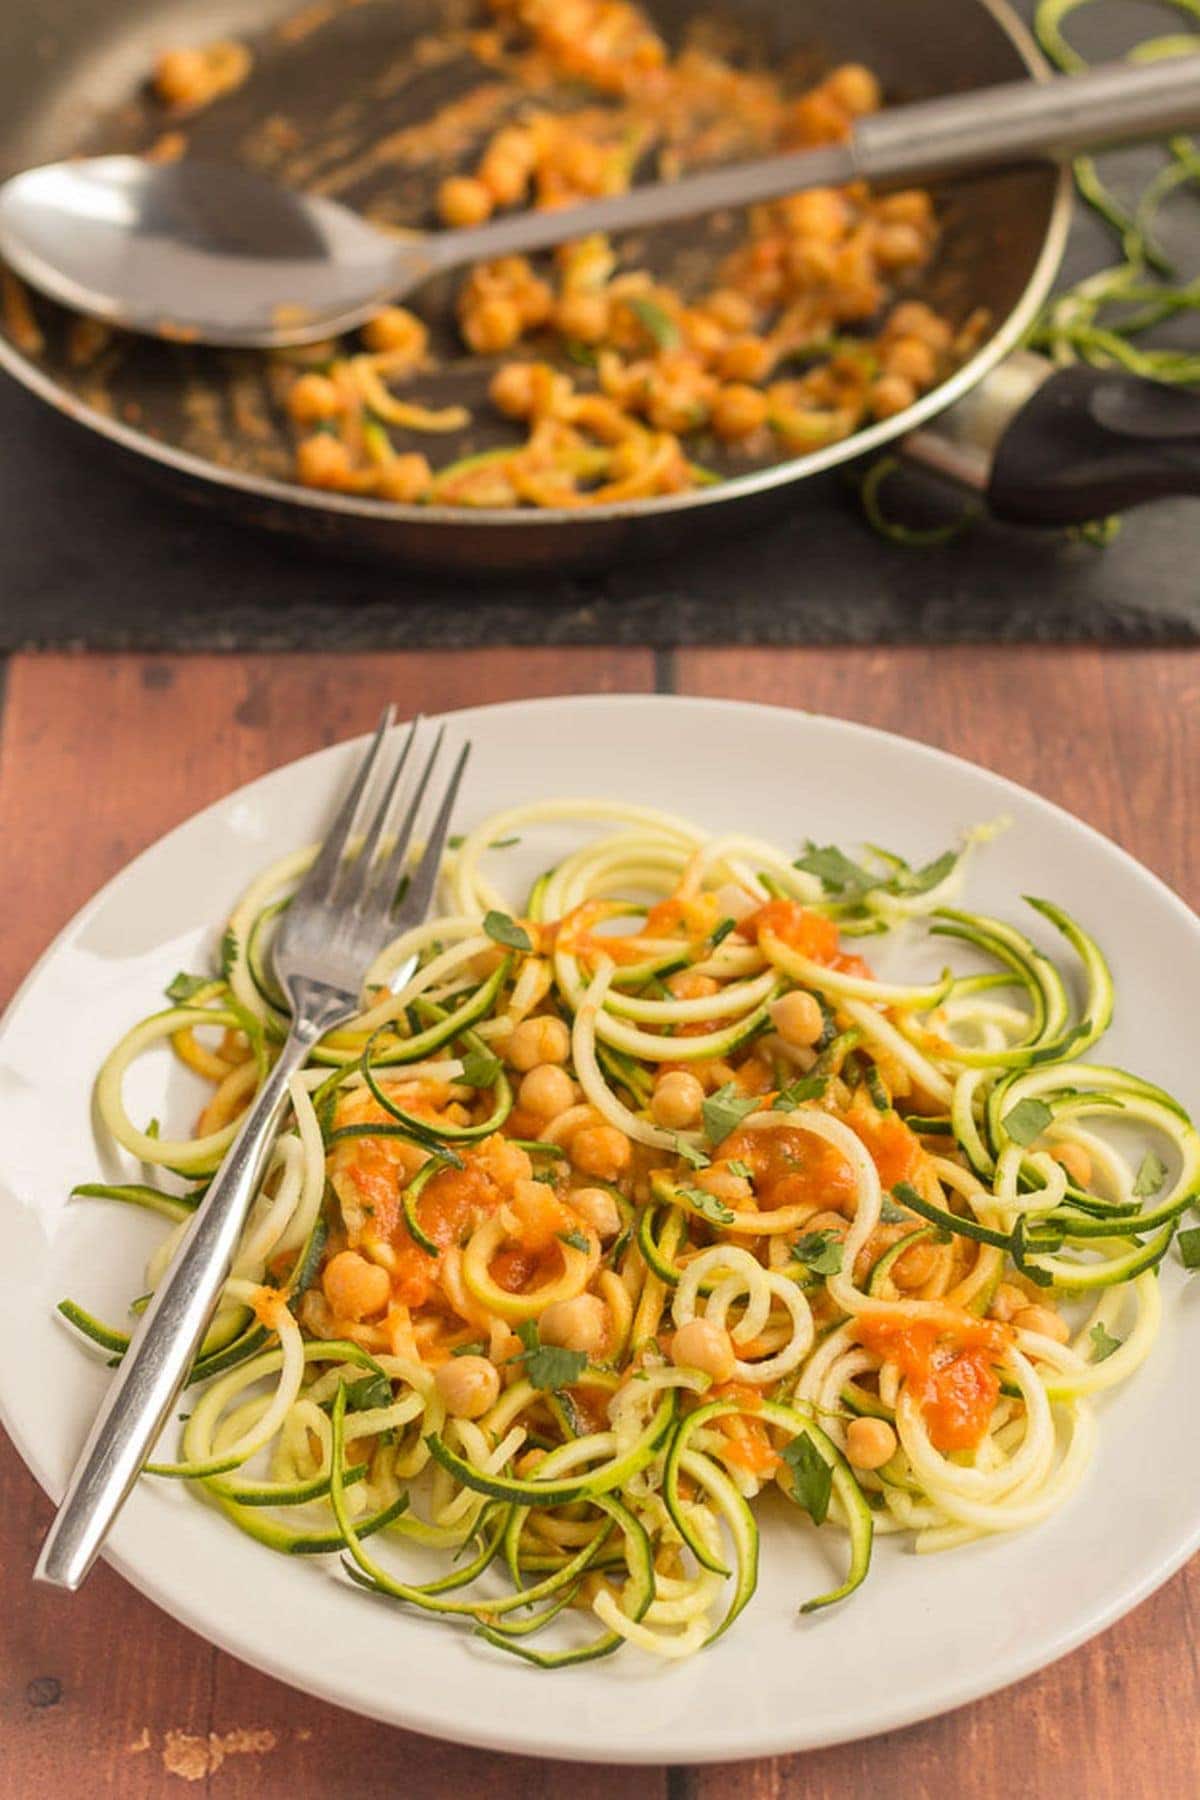 A plate of spiralized courgette spaghetti with chickpeas and the rest of the dish in a pan in the background.